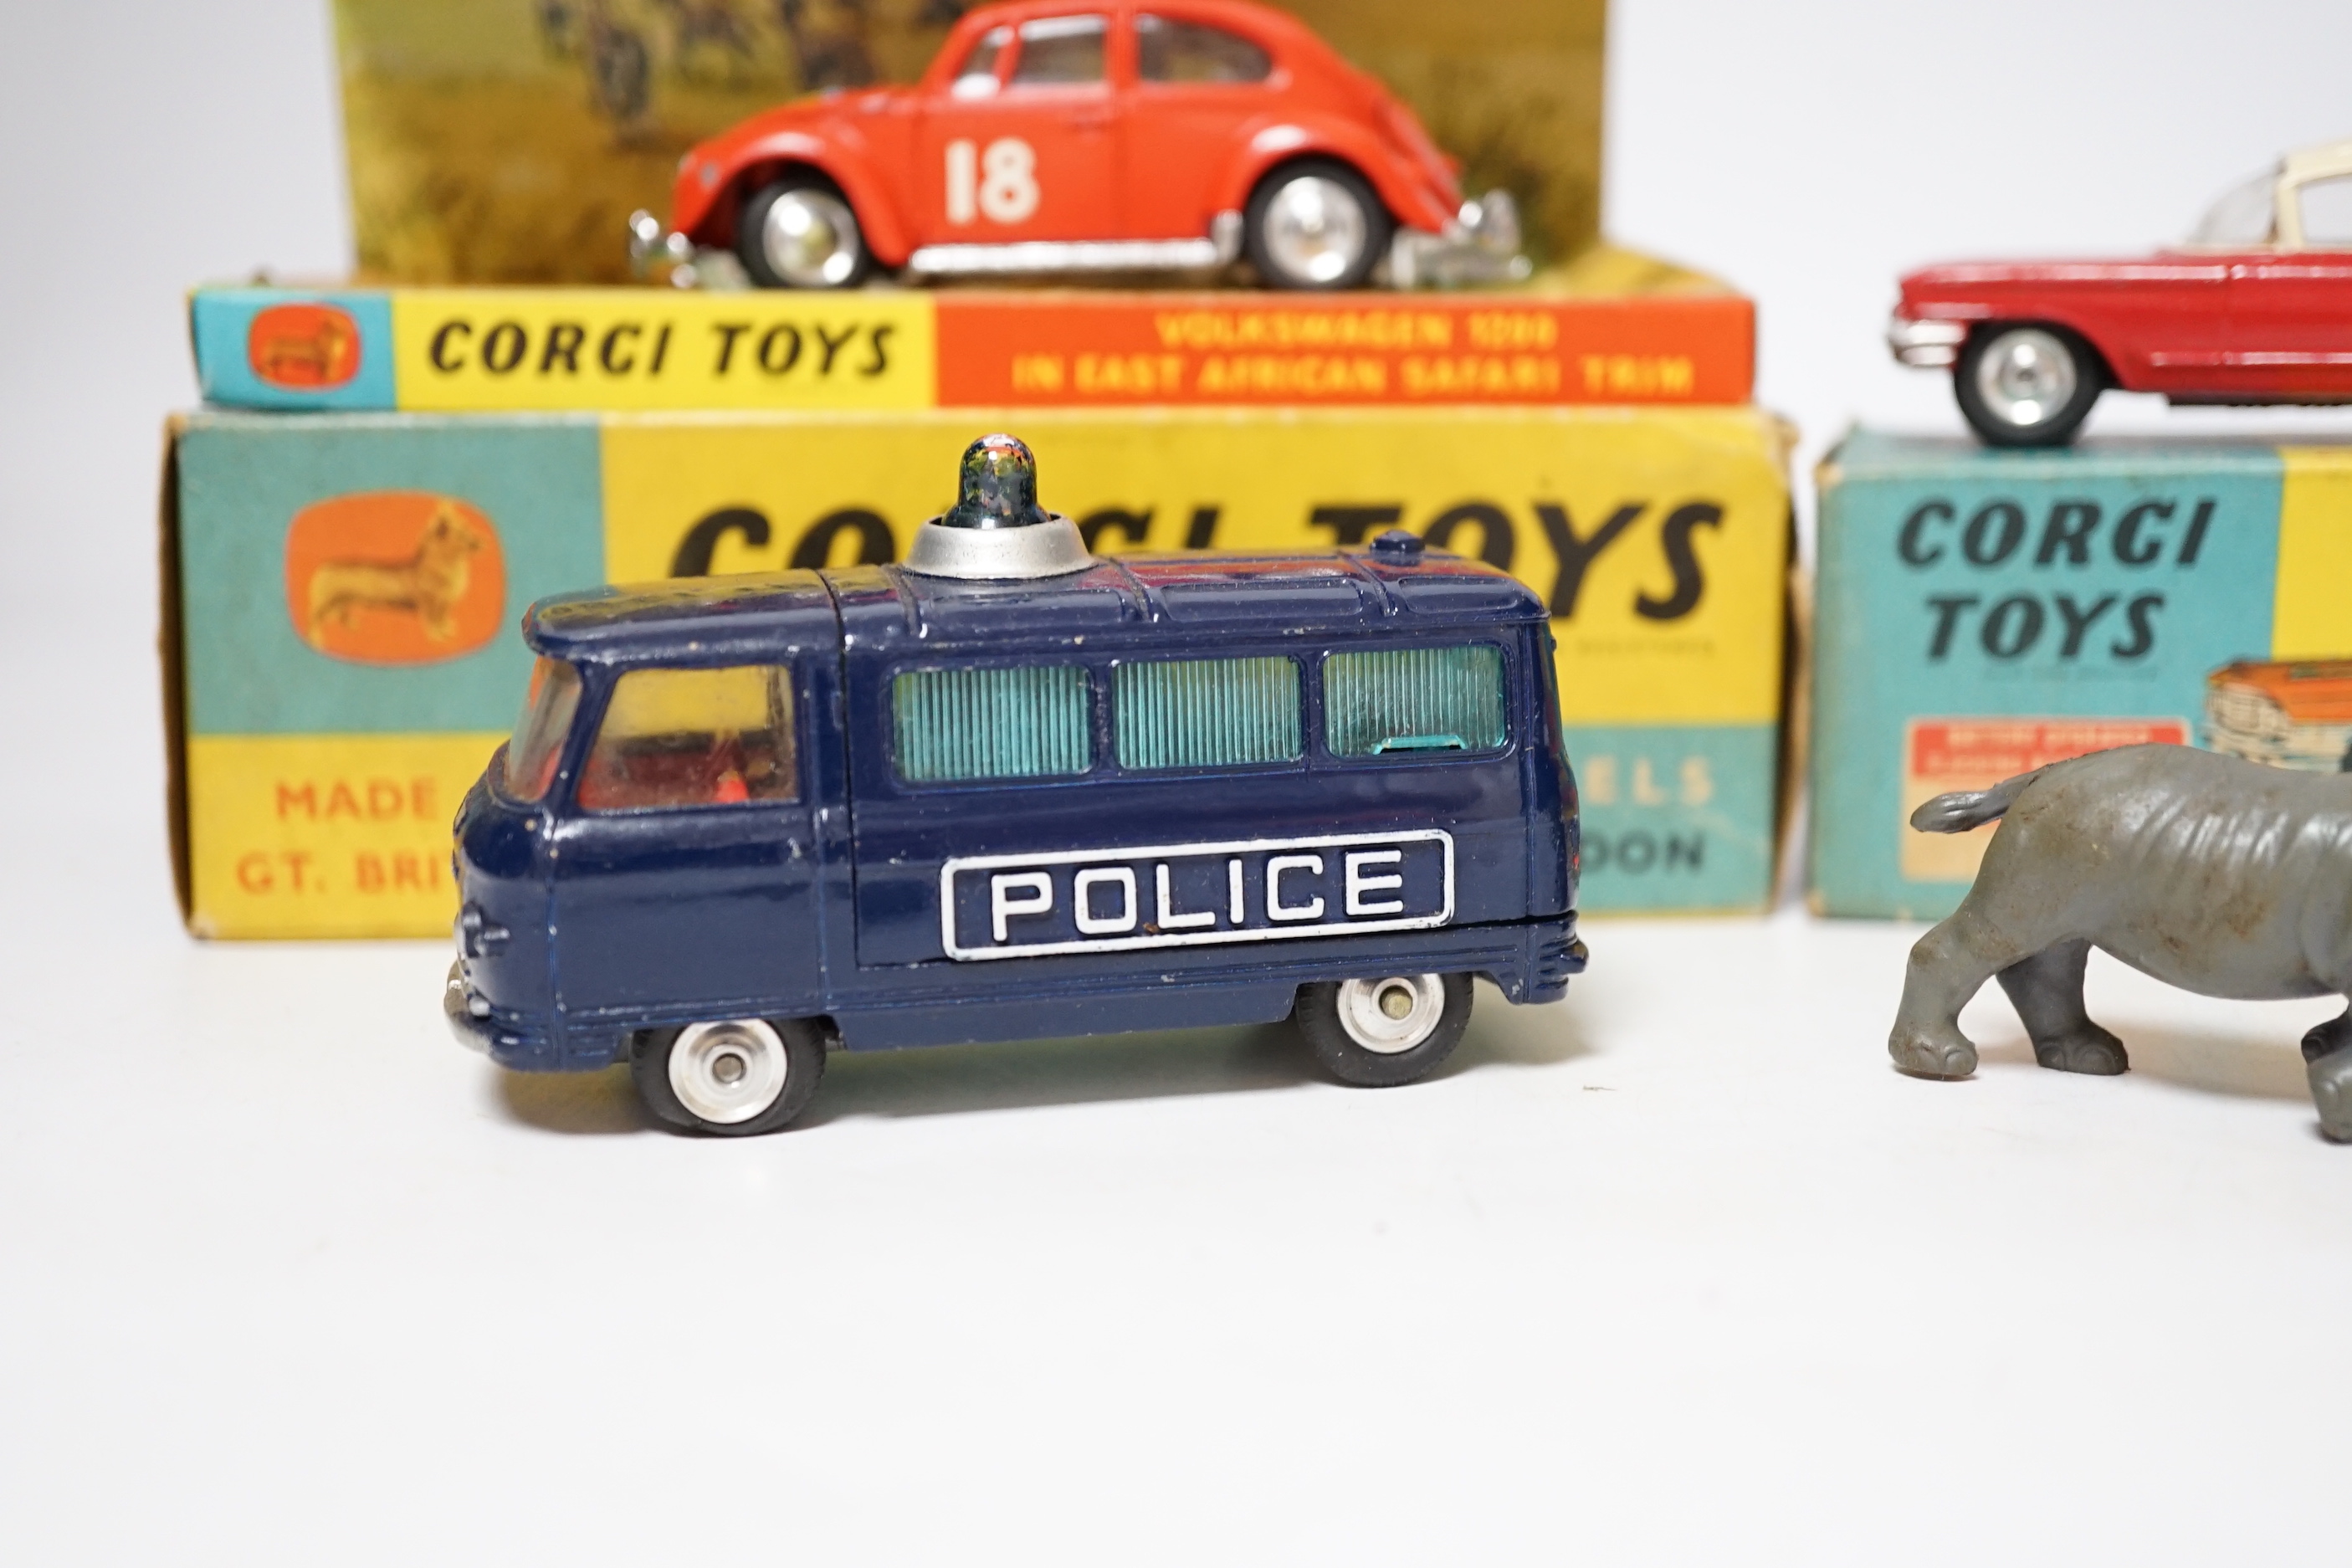 Three Corgi Toys including (256) Volkswagen 1200 in East African safari trim (with rhino and inner display stand), (437) Cadillac Superior Ambulance, both boxed, together with an unboxed Commer three-quarter ton police v